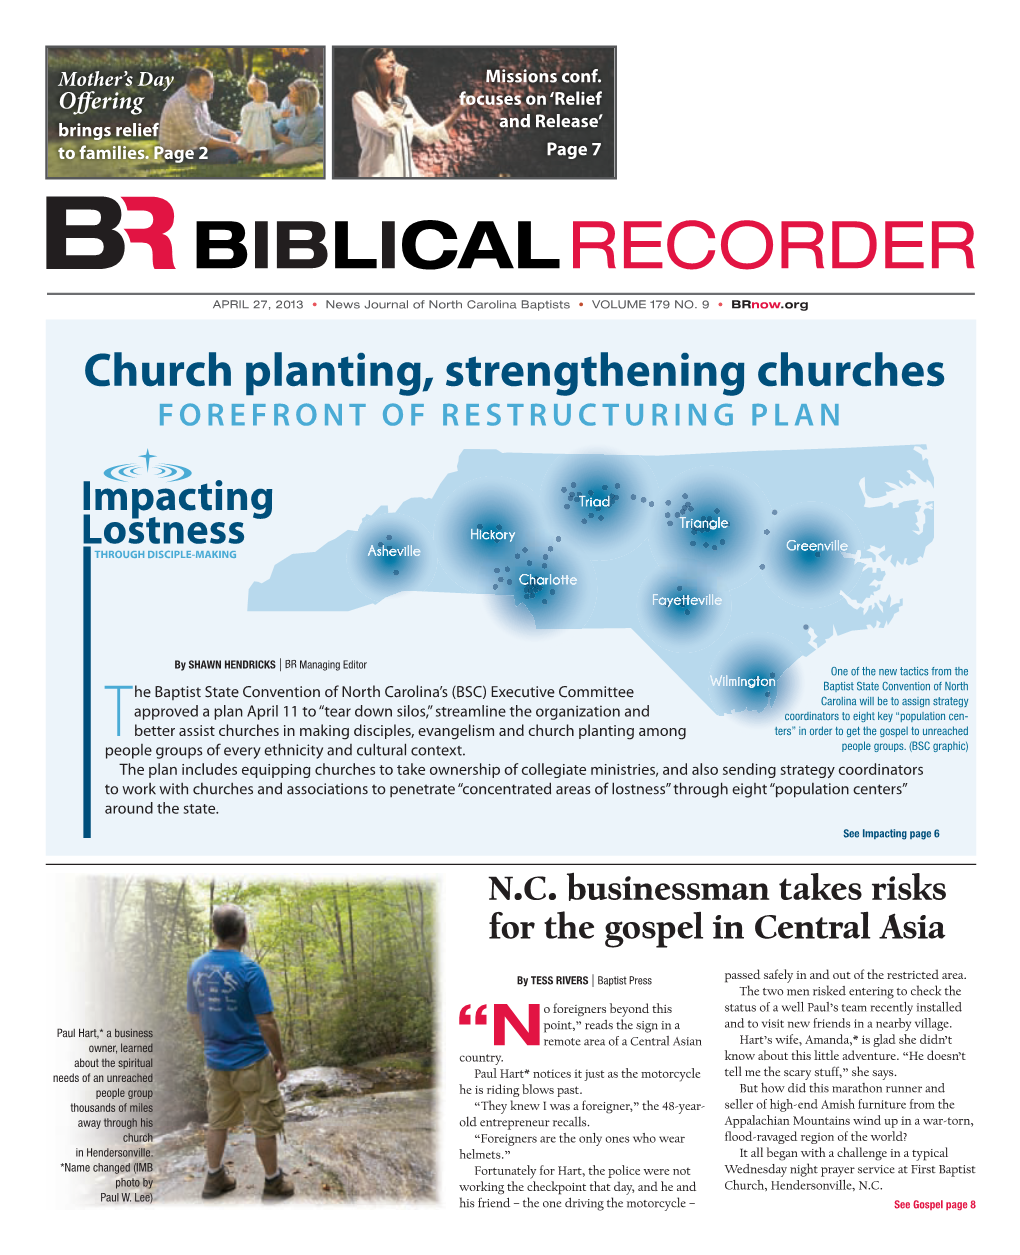 Church Planting, Strengthening Churches FOREFRONT of RESTRUCTURING PLAN